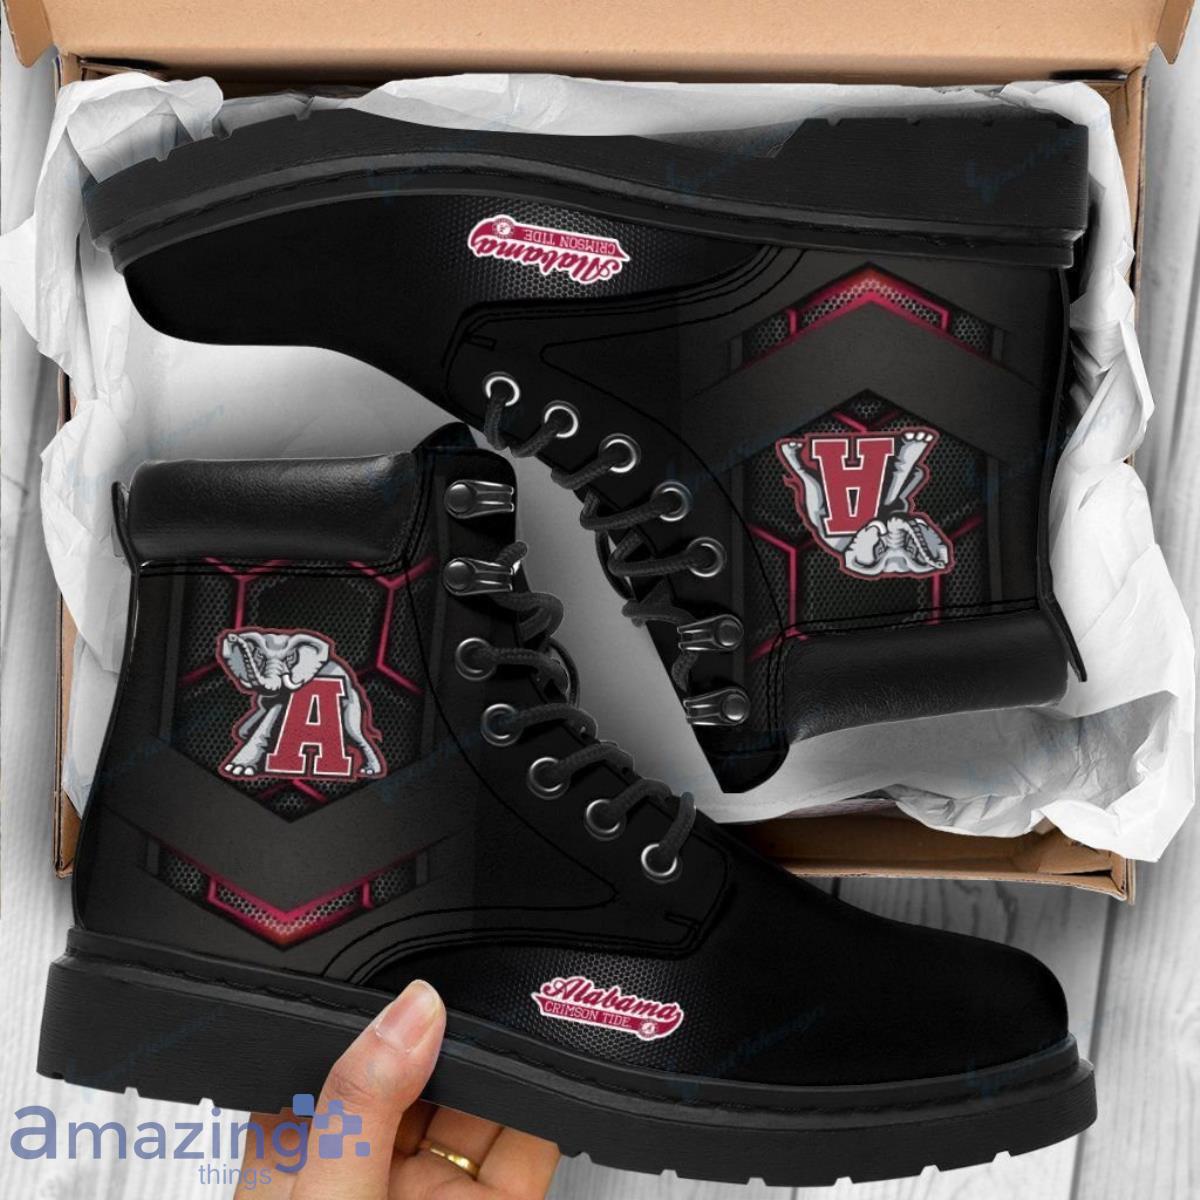 Alabama Crimson Tide Football Team Leather Boots For Men Women Best Gift For Fans Product Photo 1